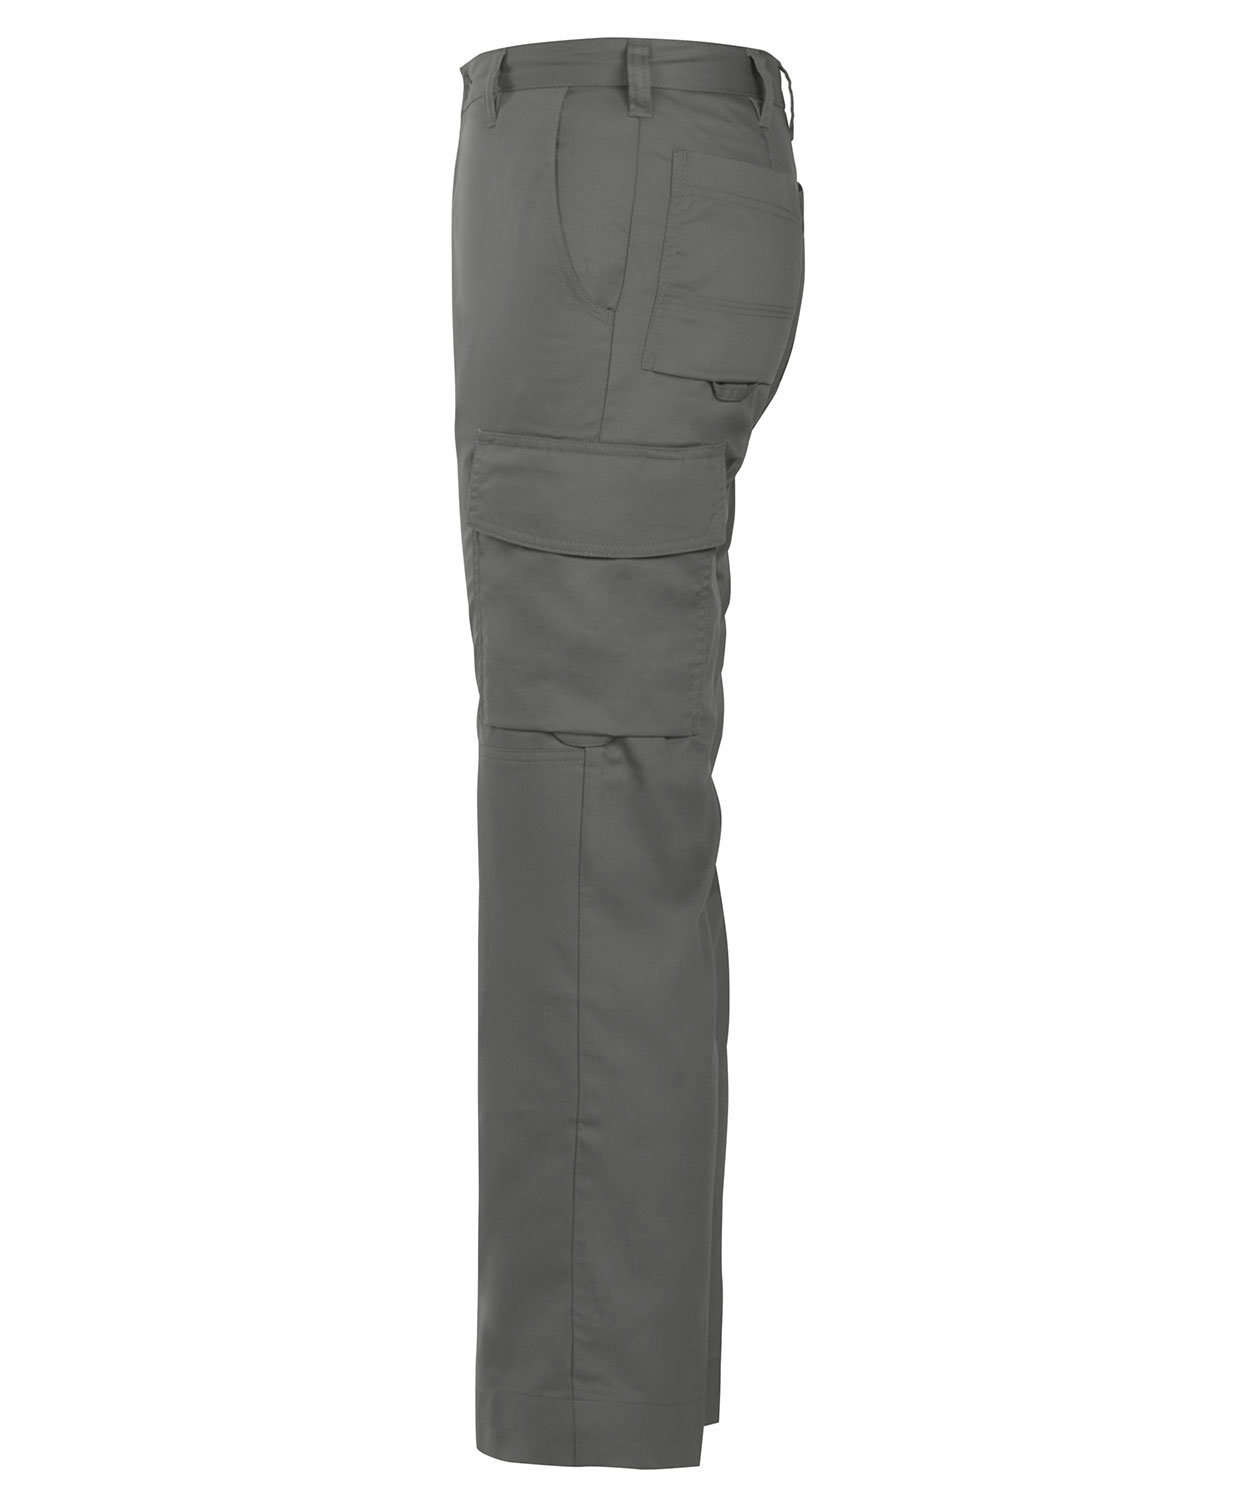 Projob 2501 Mid Weight Service Trouser Kneepad Pants-642501 Trousers Projob  Active Workwear